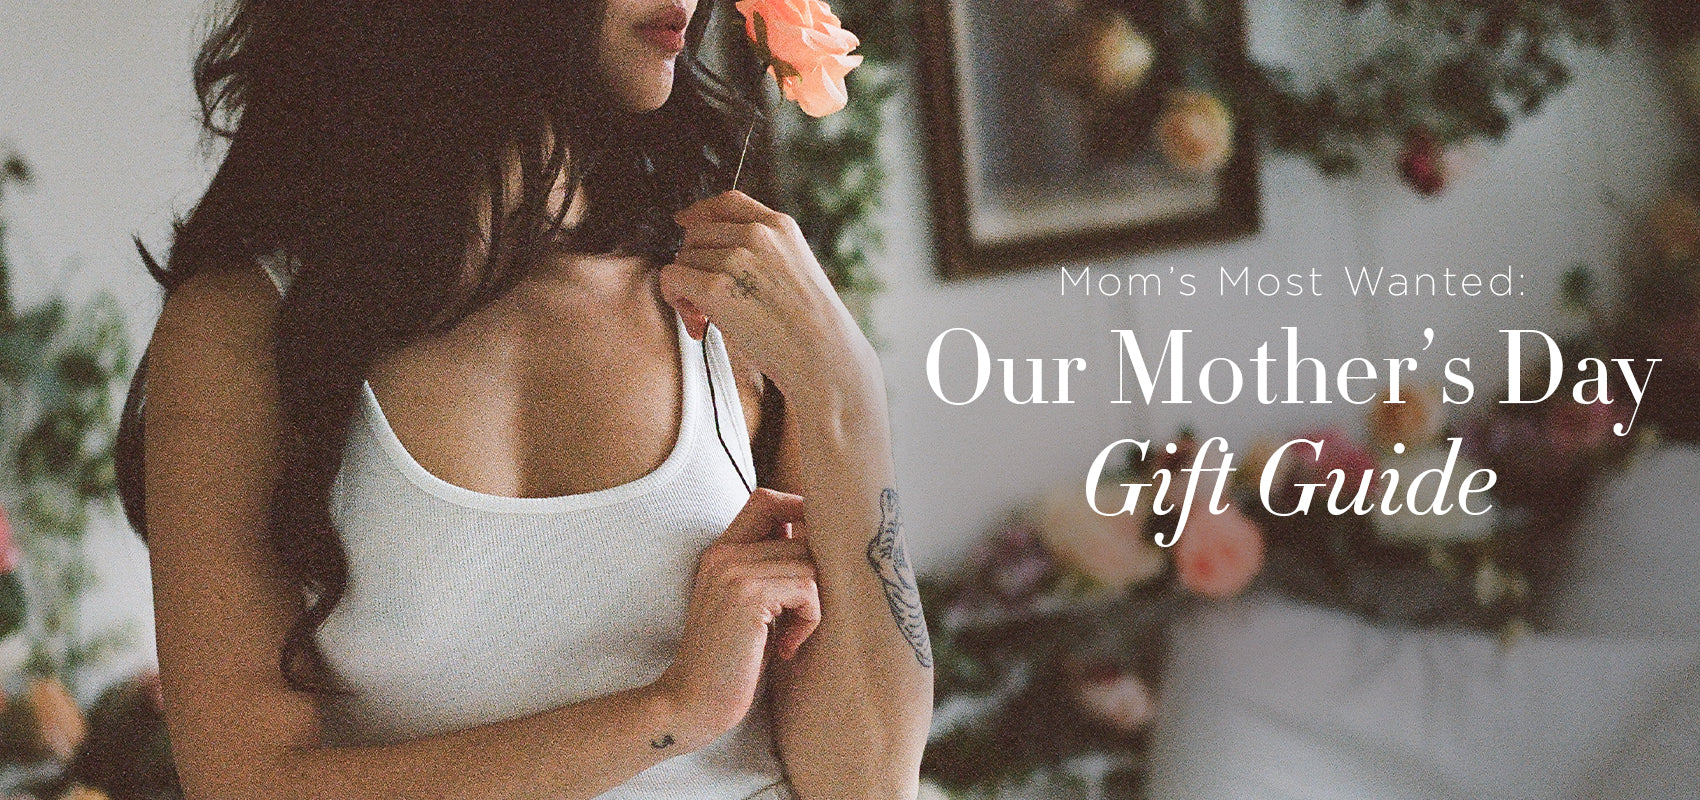 Mom’s Most Wanted: Our Mother’s Day Gift Guide